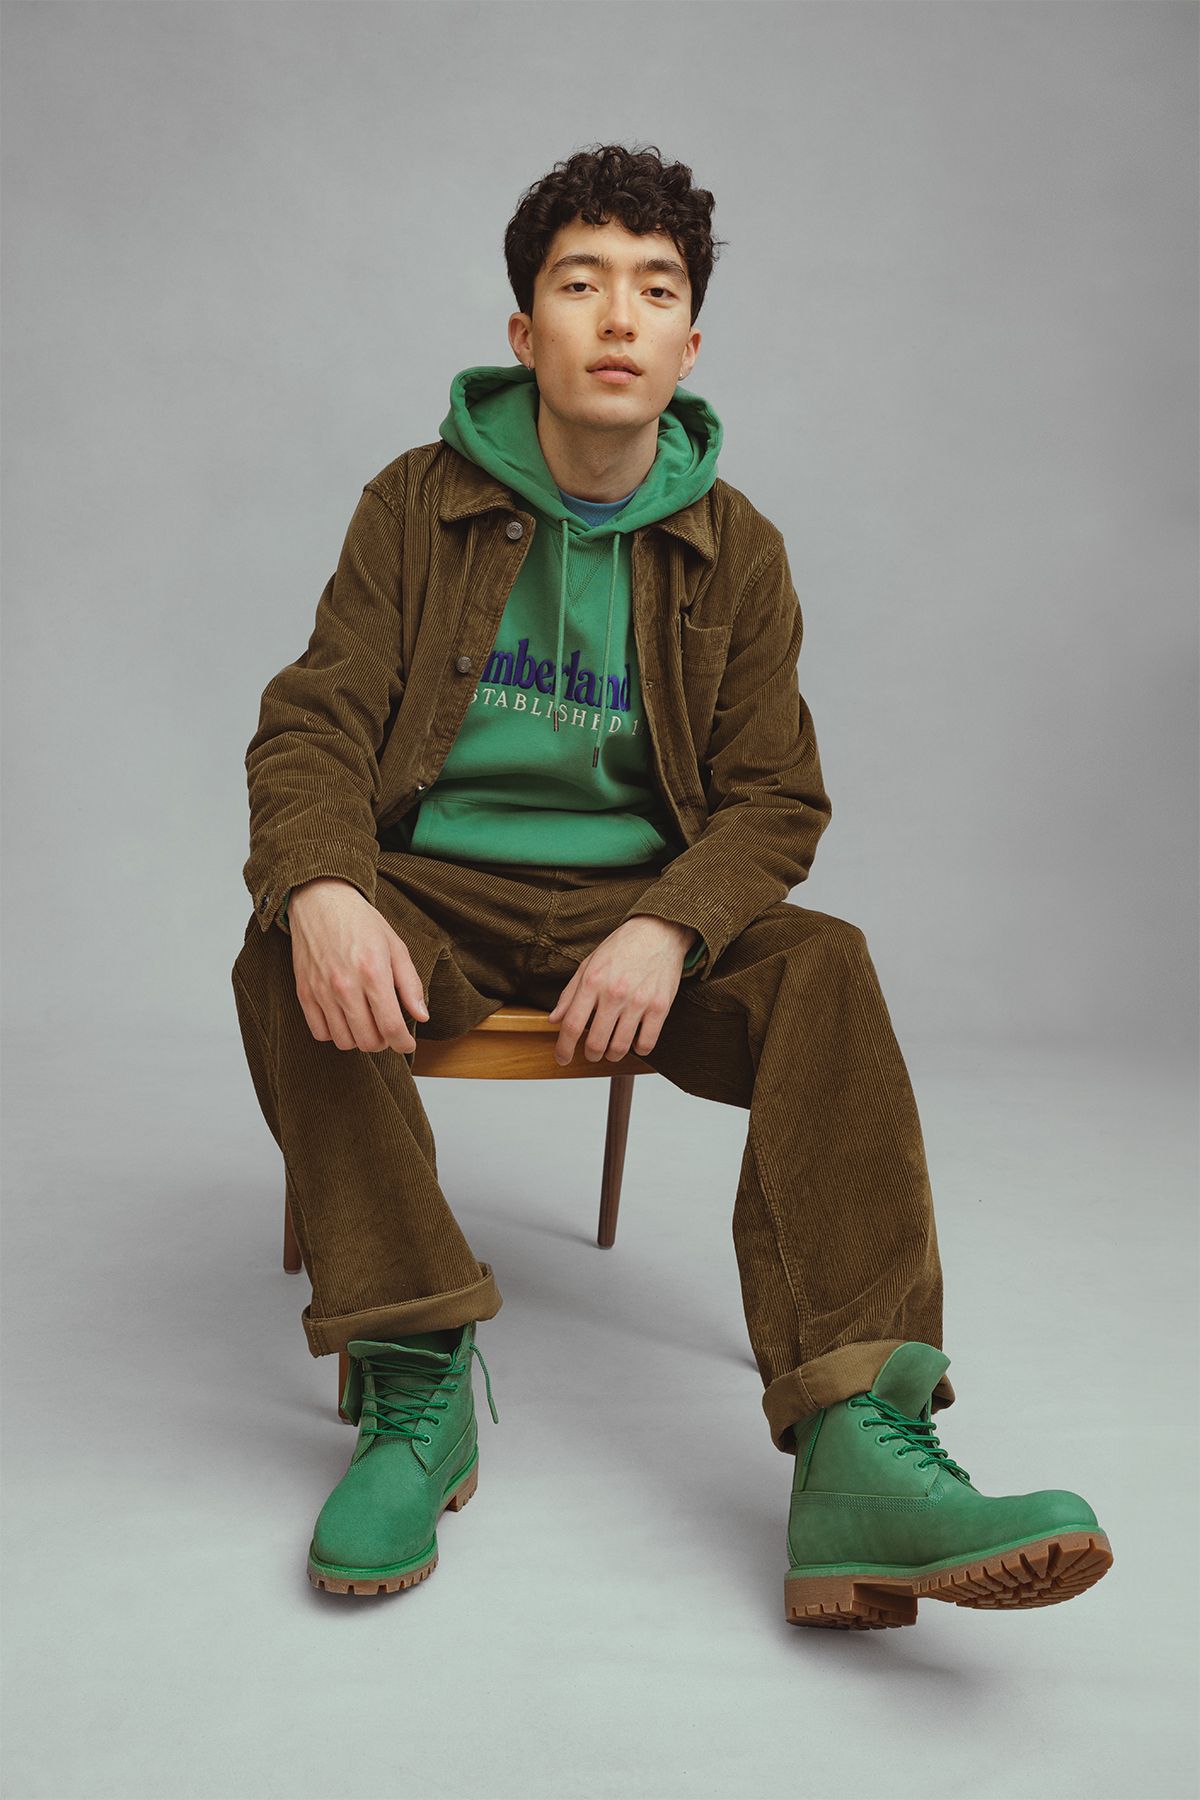 A man sitting on a chair in a green jacket and green boots.